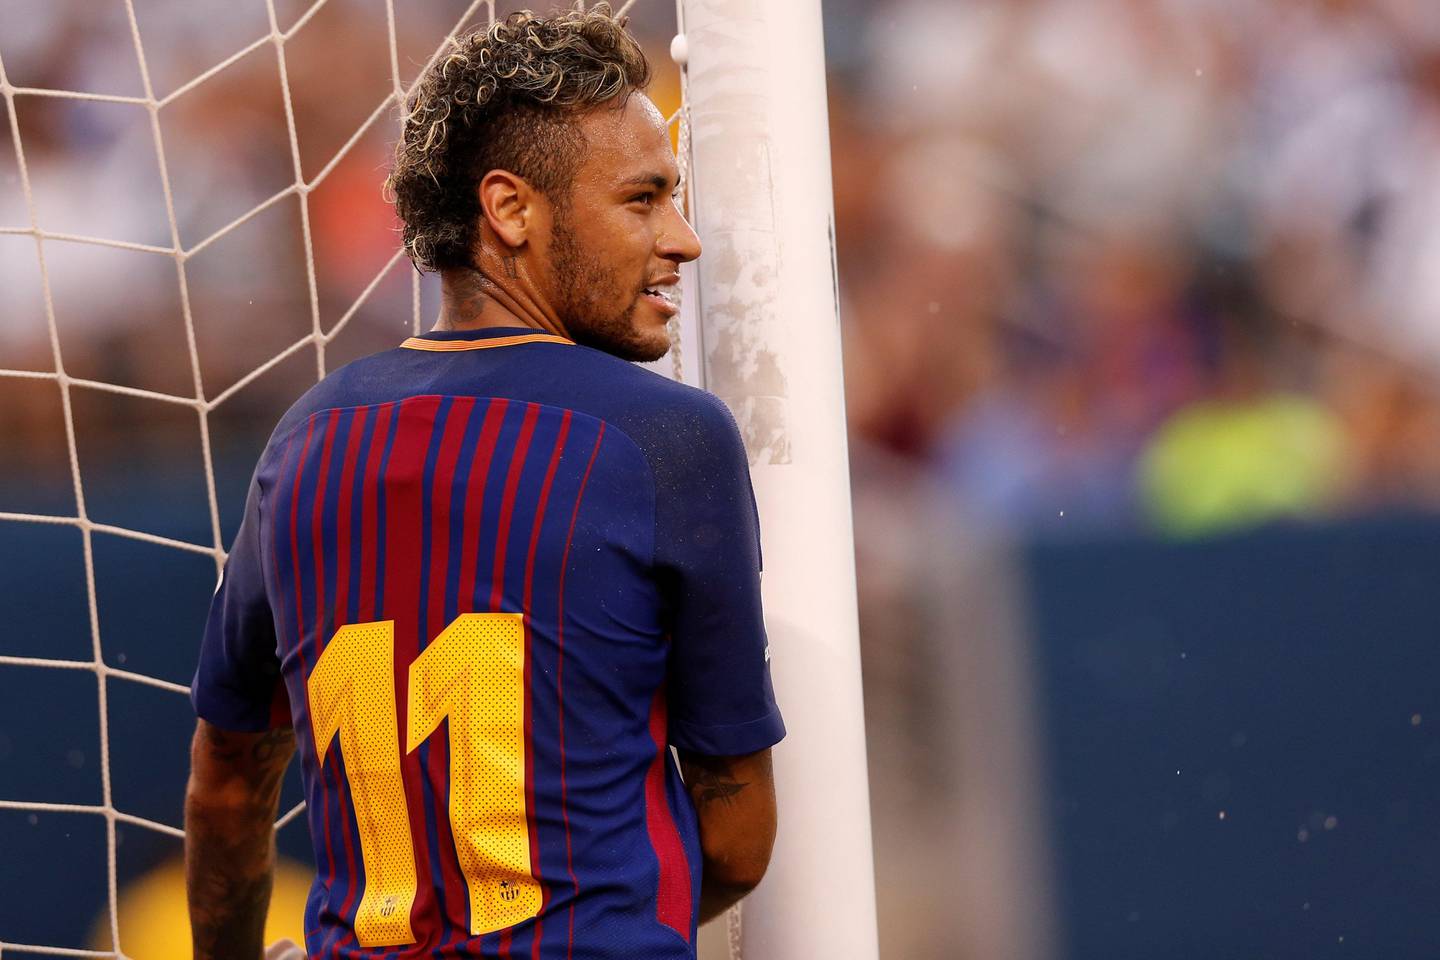 Football Soccer - Barcelona v Juventus - International Champions Cup - East Rutherford, New Jersey, U.S. - July 22, 2017 - Barcelona's Neymar reacts after missed shot against Juventus.  REUTERS/Mike Segar